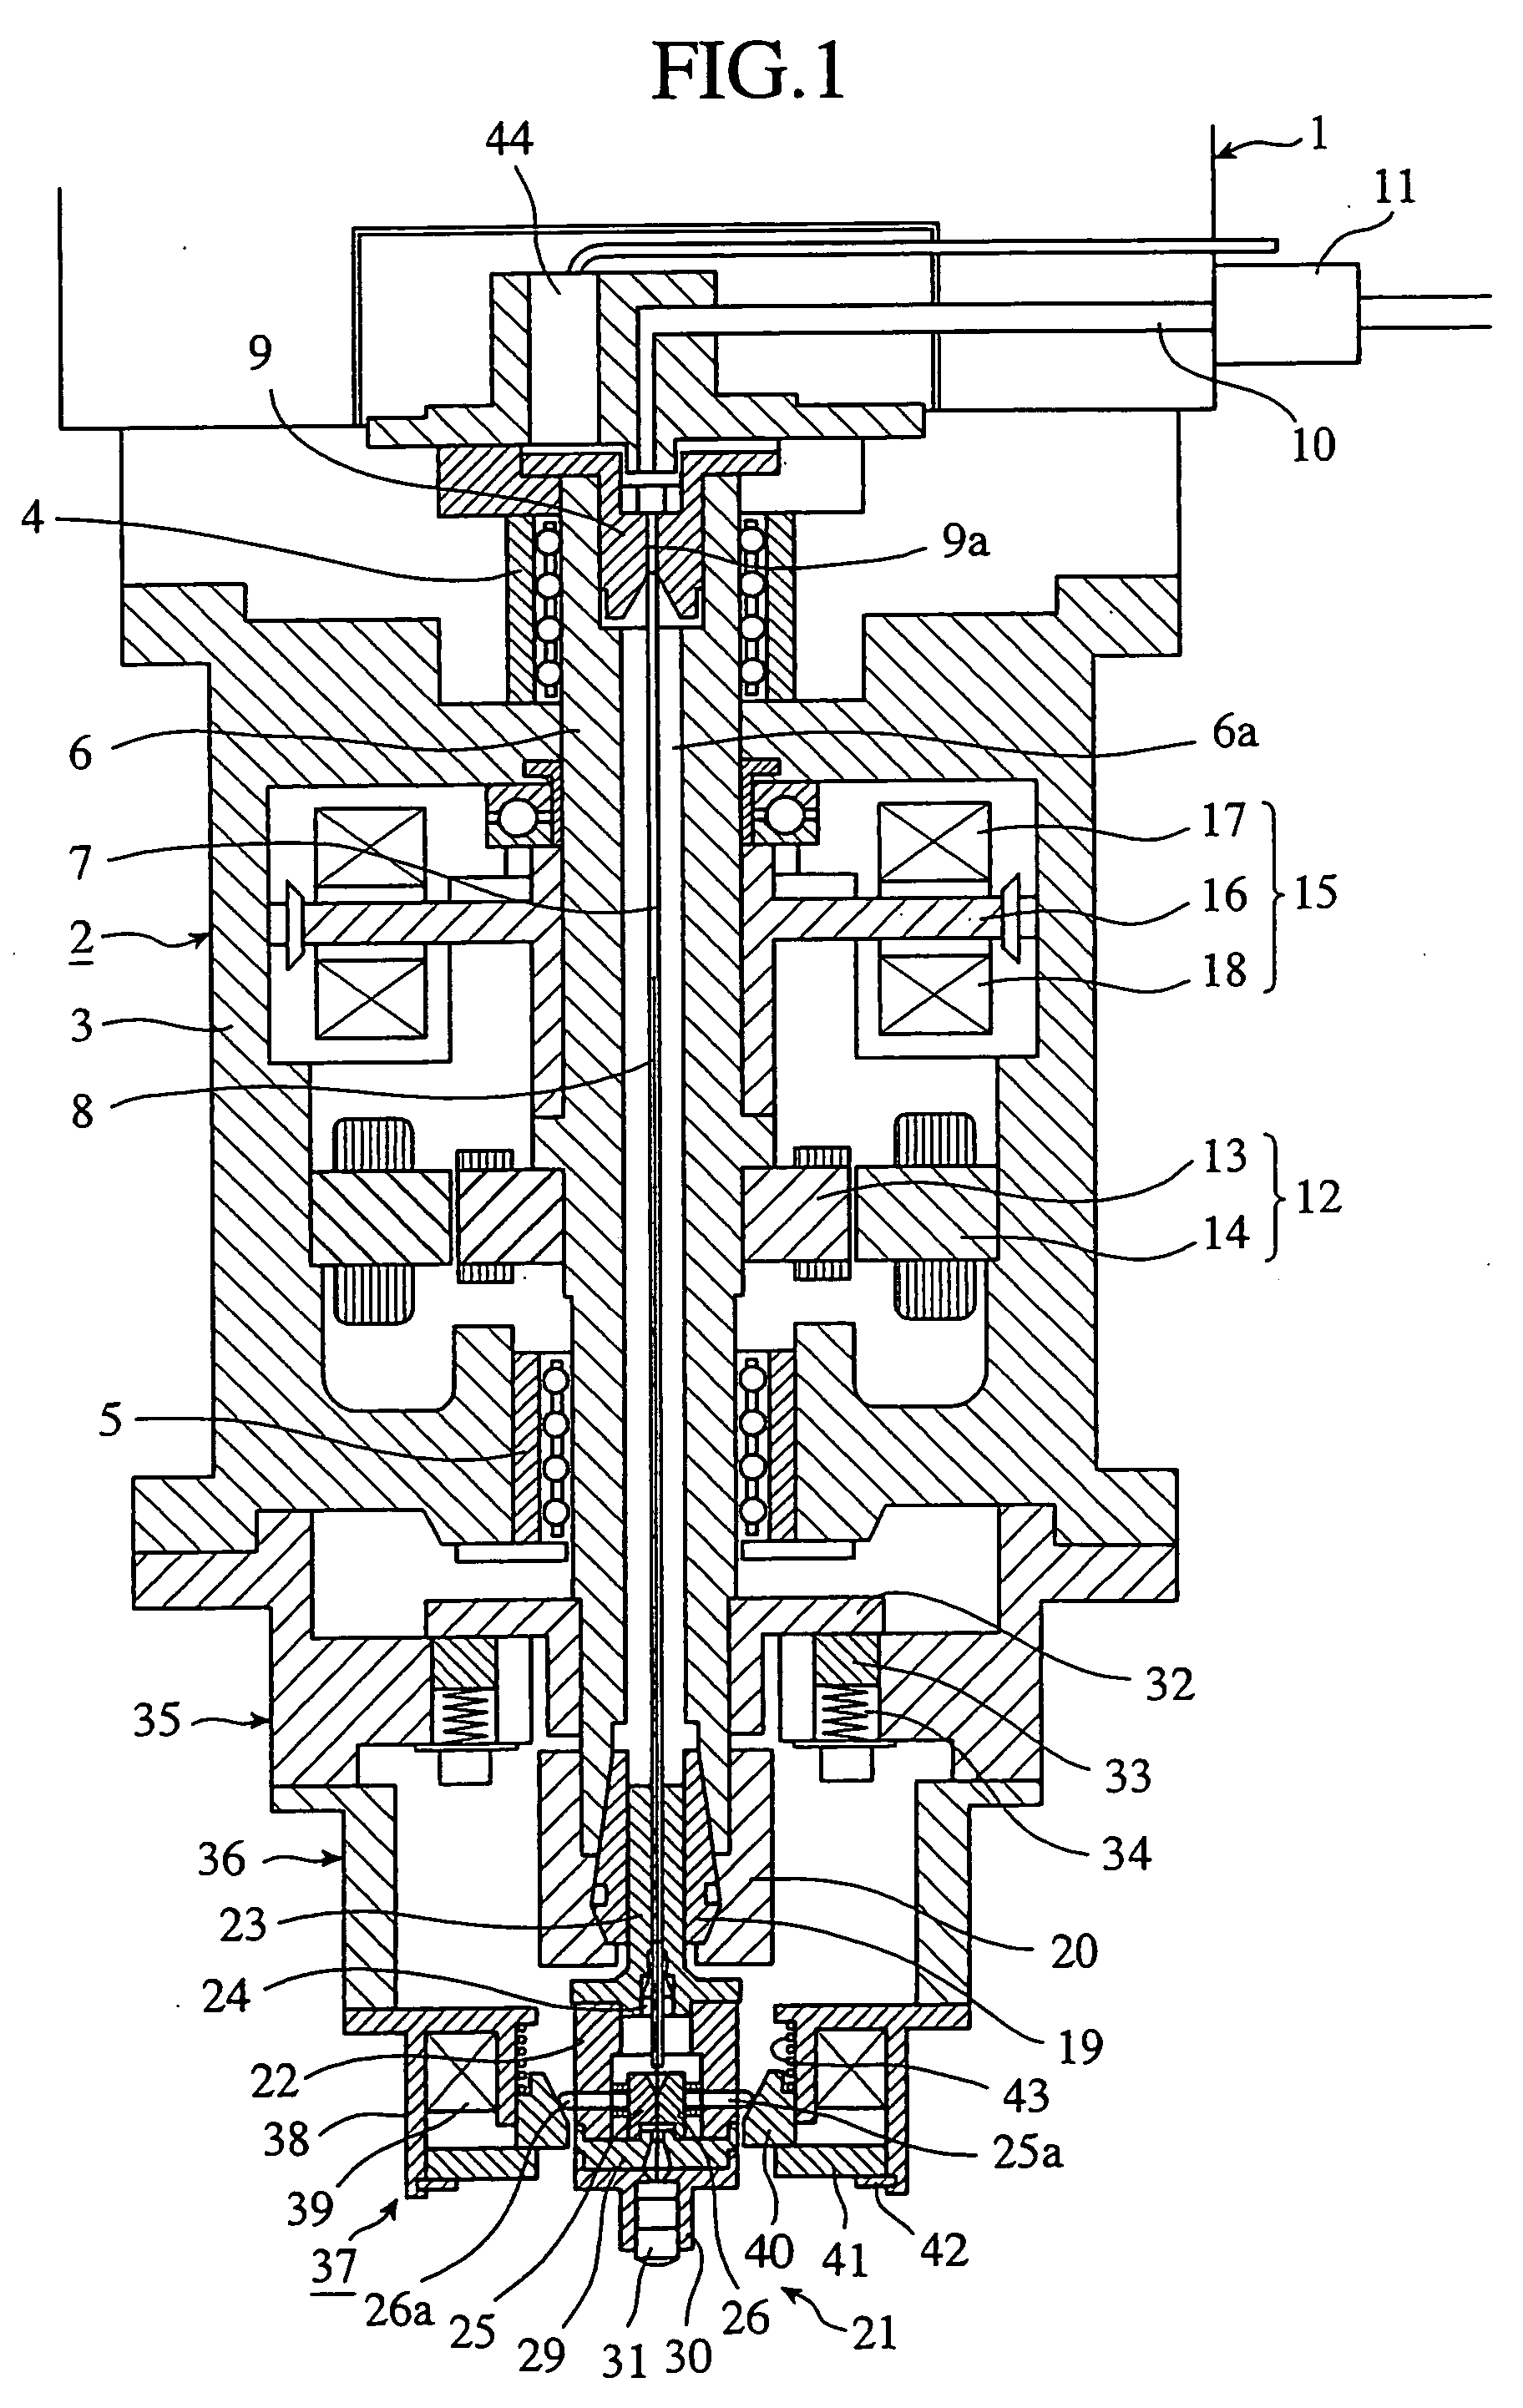 Electric discharge machining apparatus